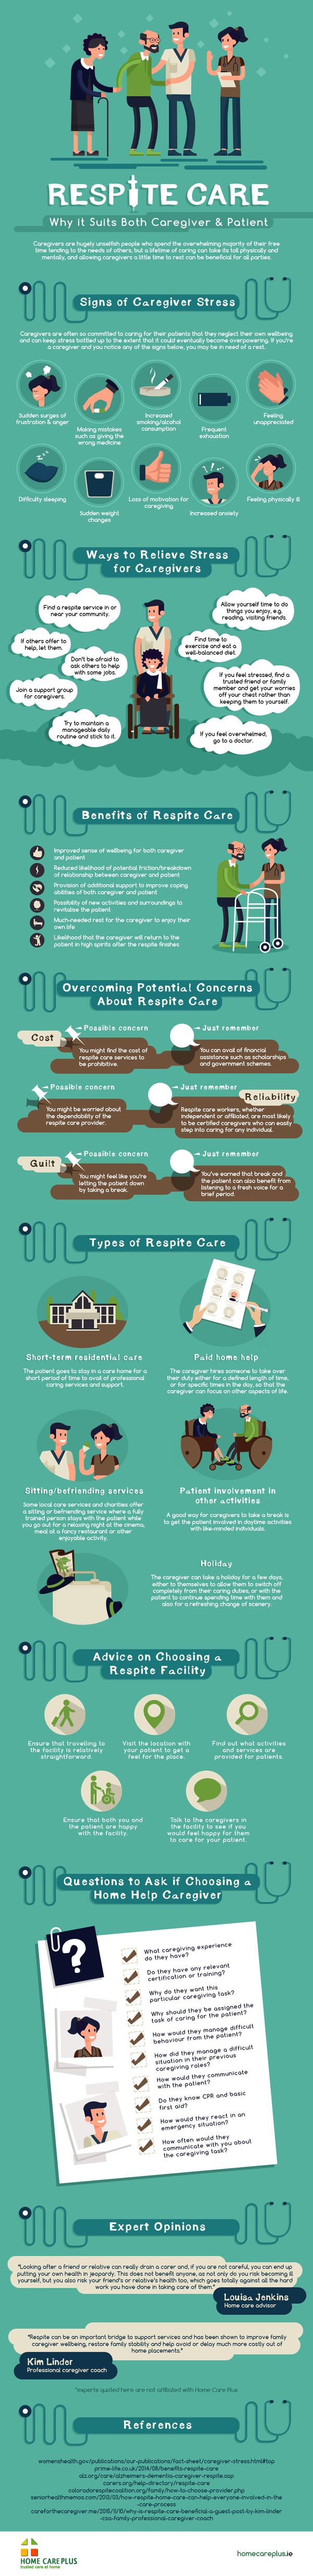 Respite Care Why it Suits Both Caregiver & Patient-Infographic